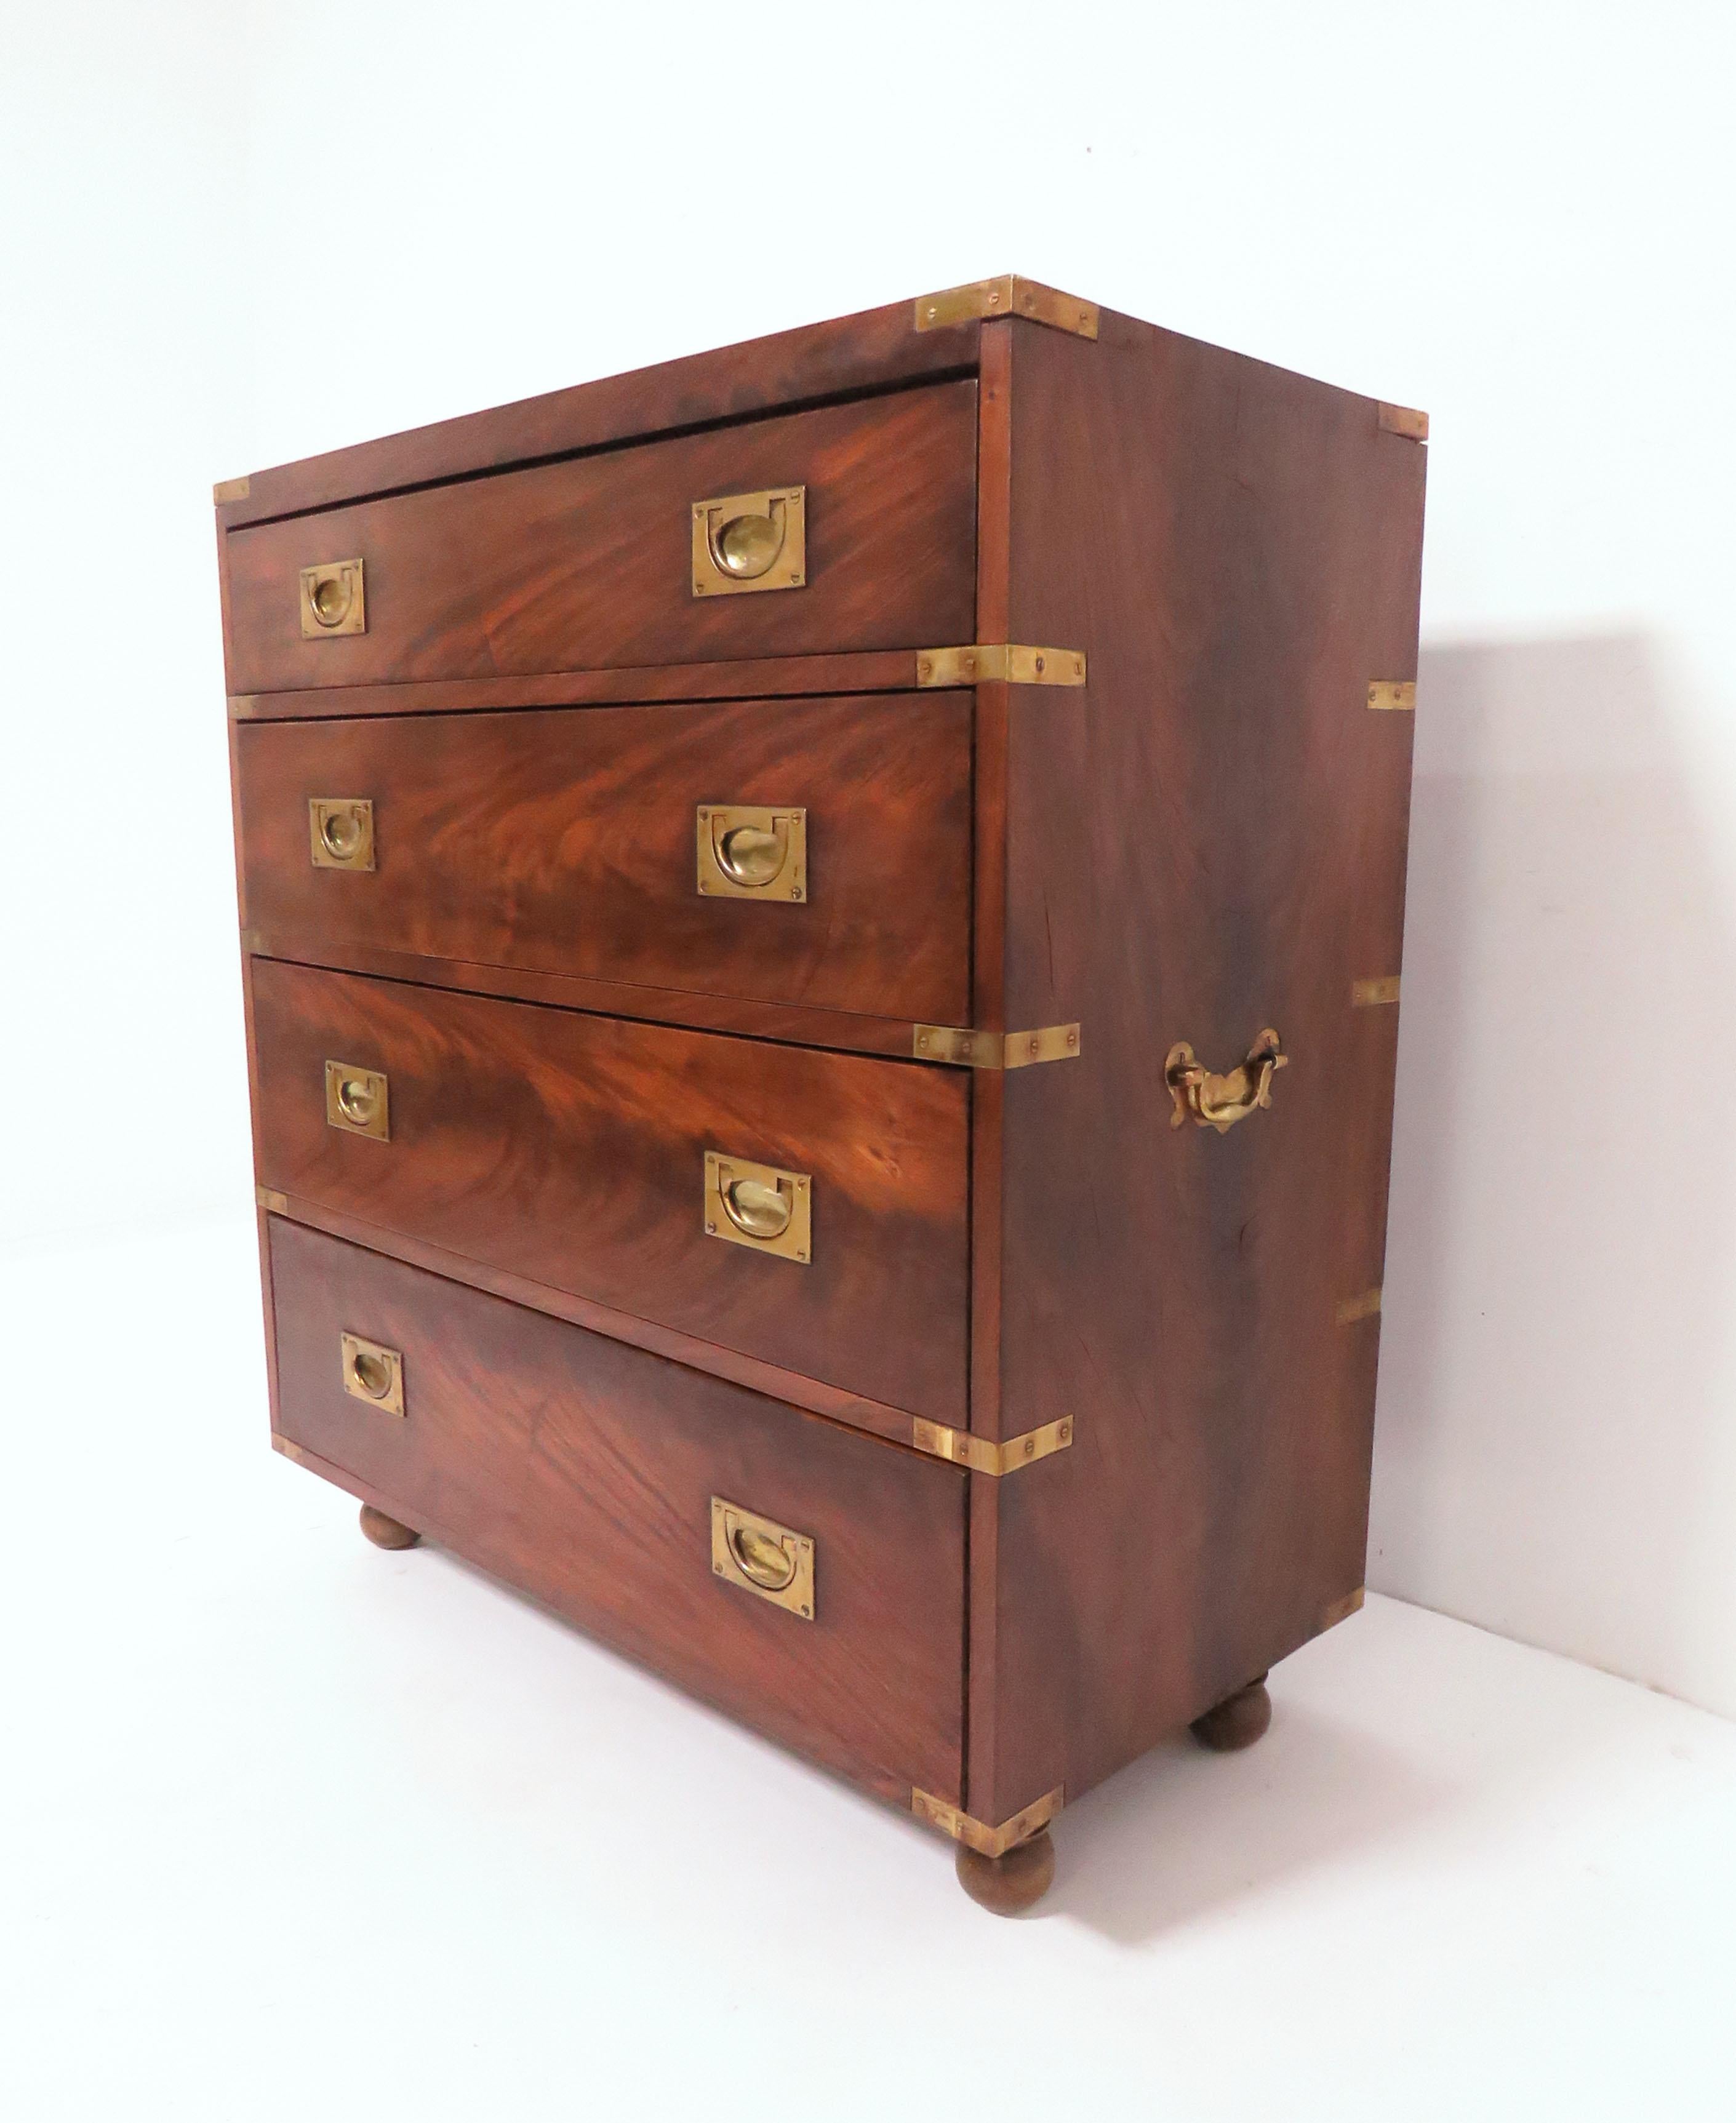 A very fine four drawer campaign dressing chest in flamed mahogany with solid brass hardware on ball feet.